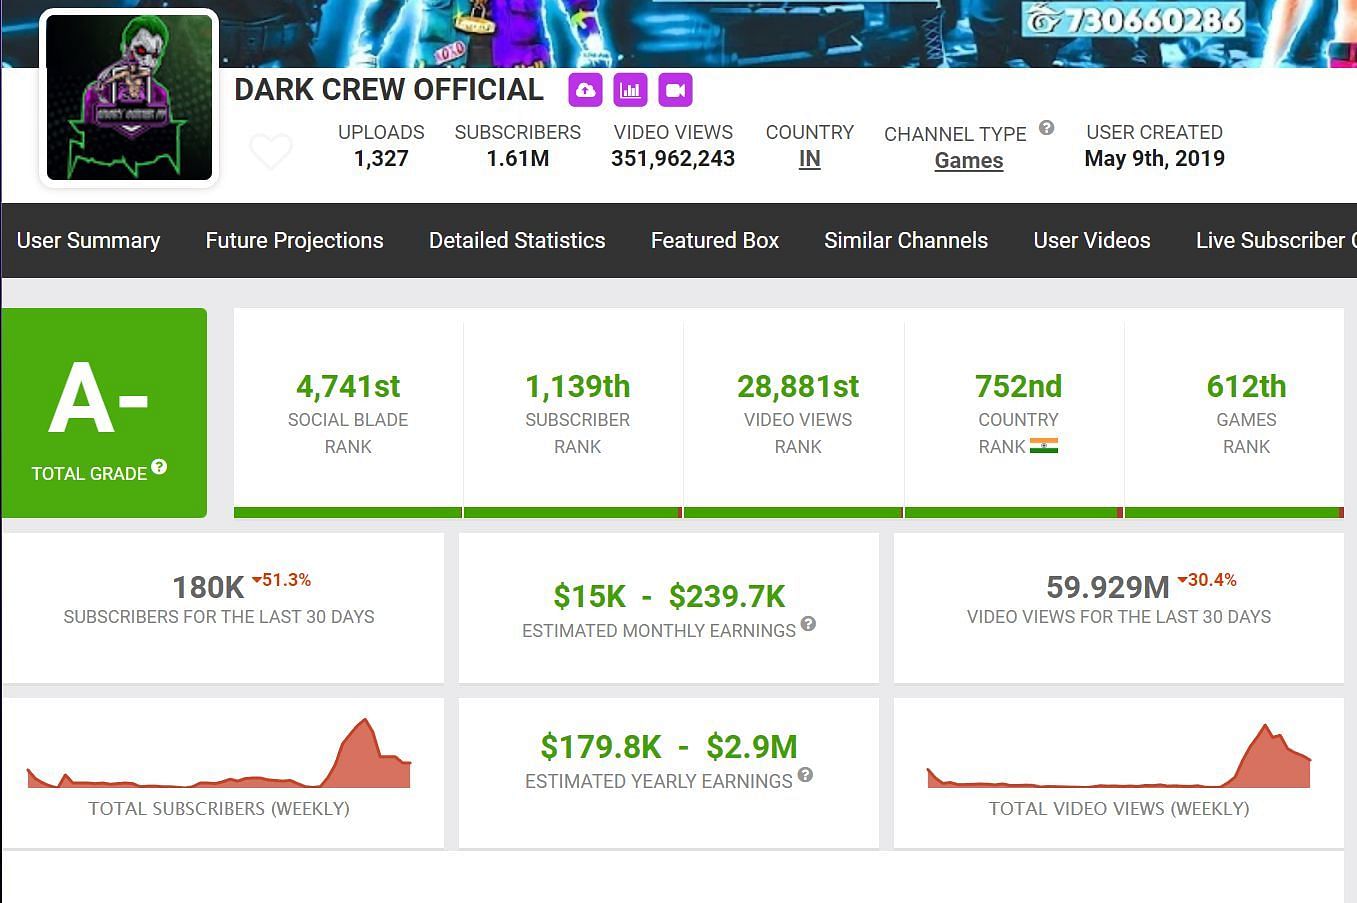 Earnings from the main Dark Crew Official YouTube channel (Image via Social Blade)